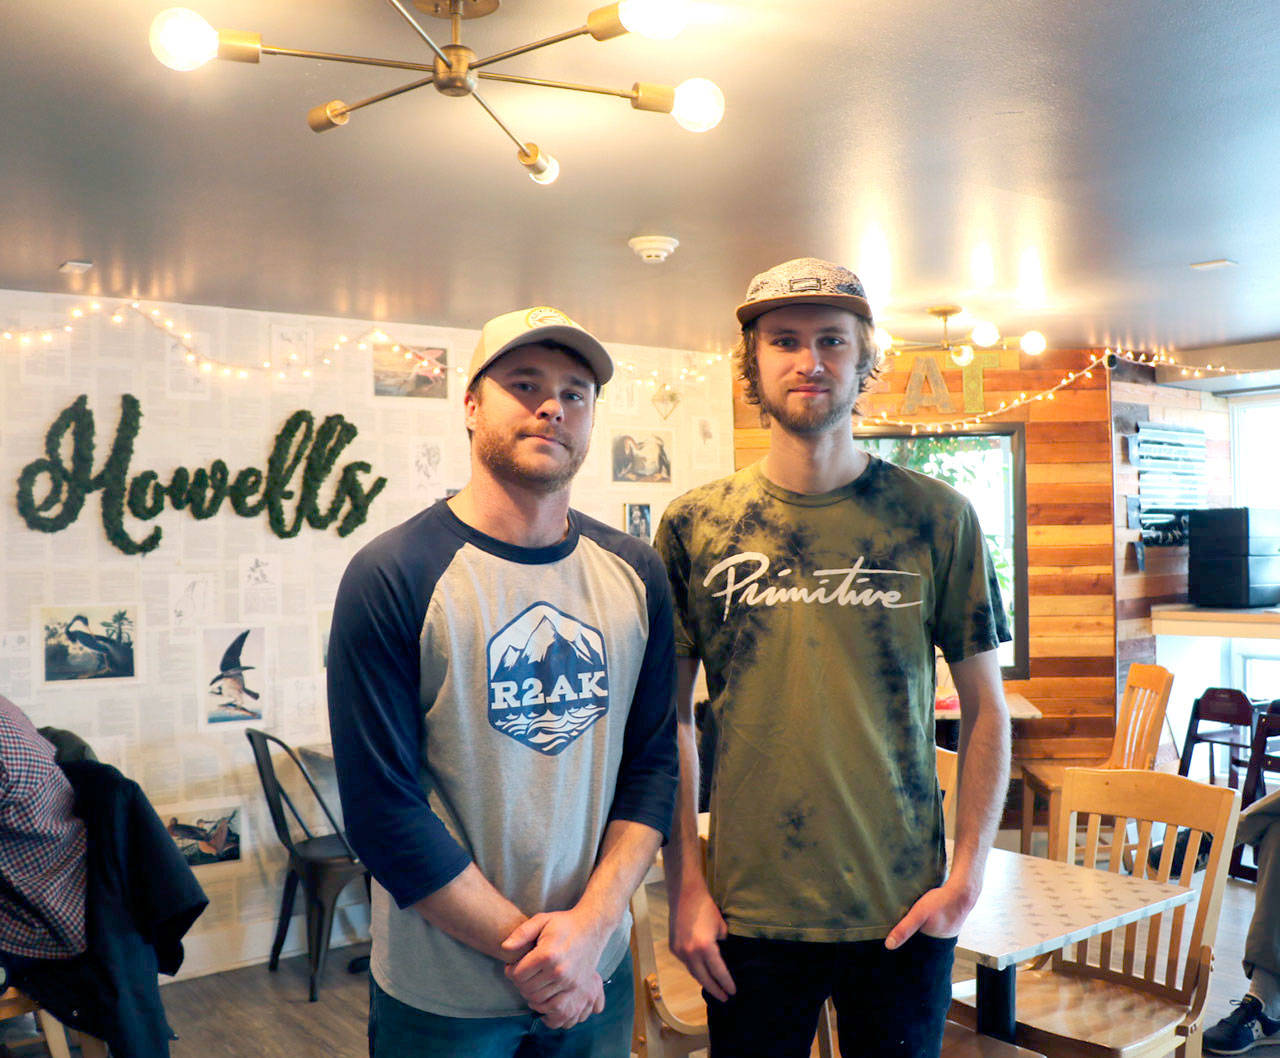 Mike and Steve Howell of Howell’s Sandwich Co. will offer the “PT Special,” a free meal for those who might be struggling for food during school cancellations and unemployment due to COVID-19. (Ken Park/Peninsula Daily News)